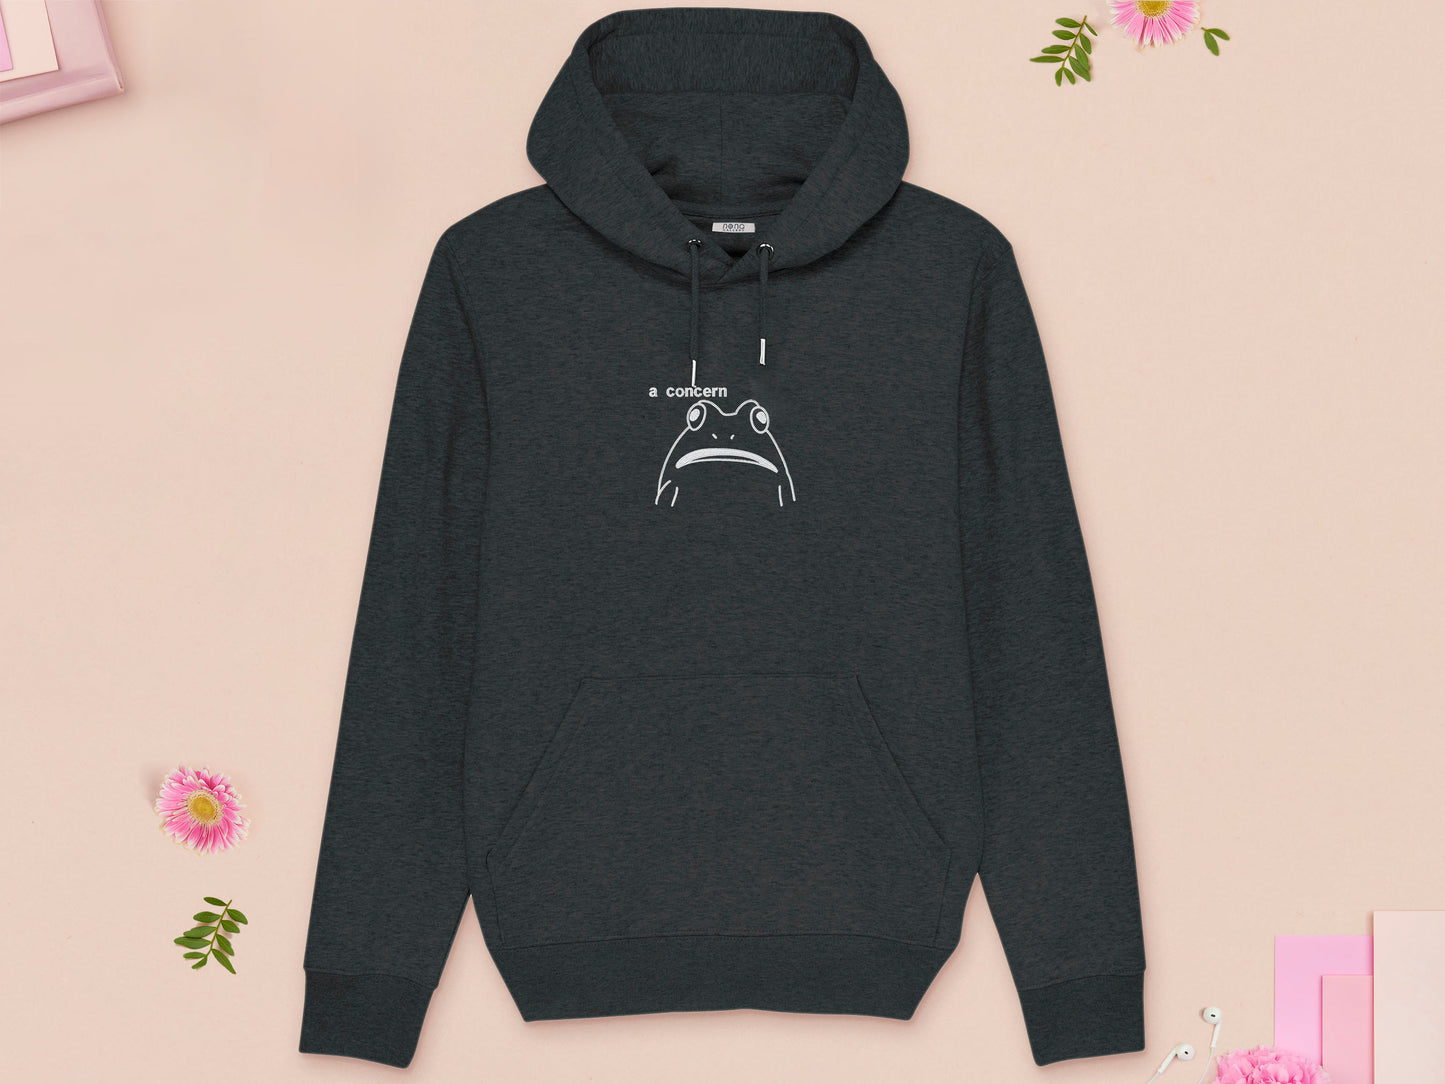 A grey long sleeve fleece hoodie, with an embroidered white thread design of cute confused looking frog with the text a concern.